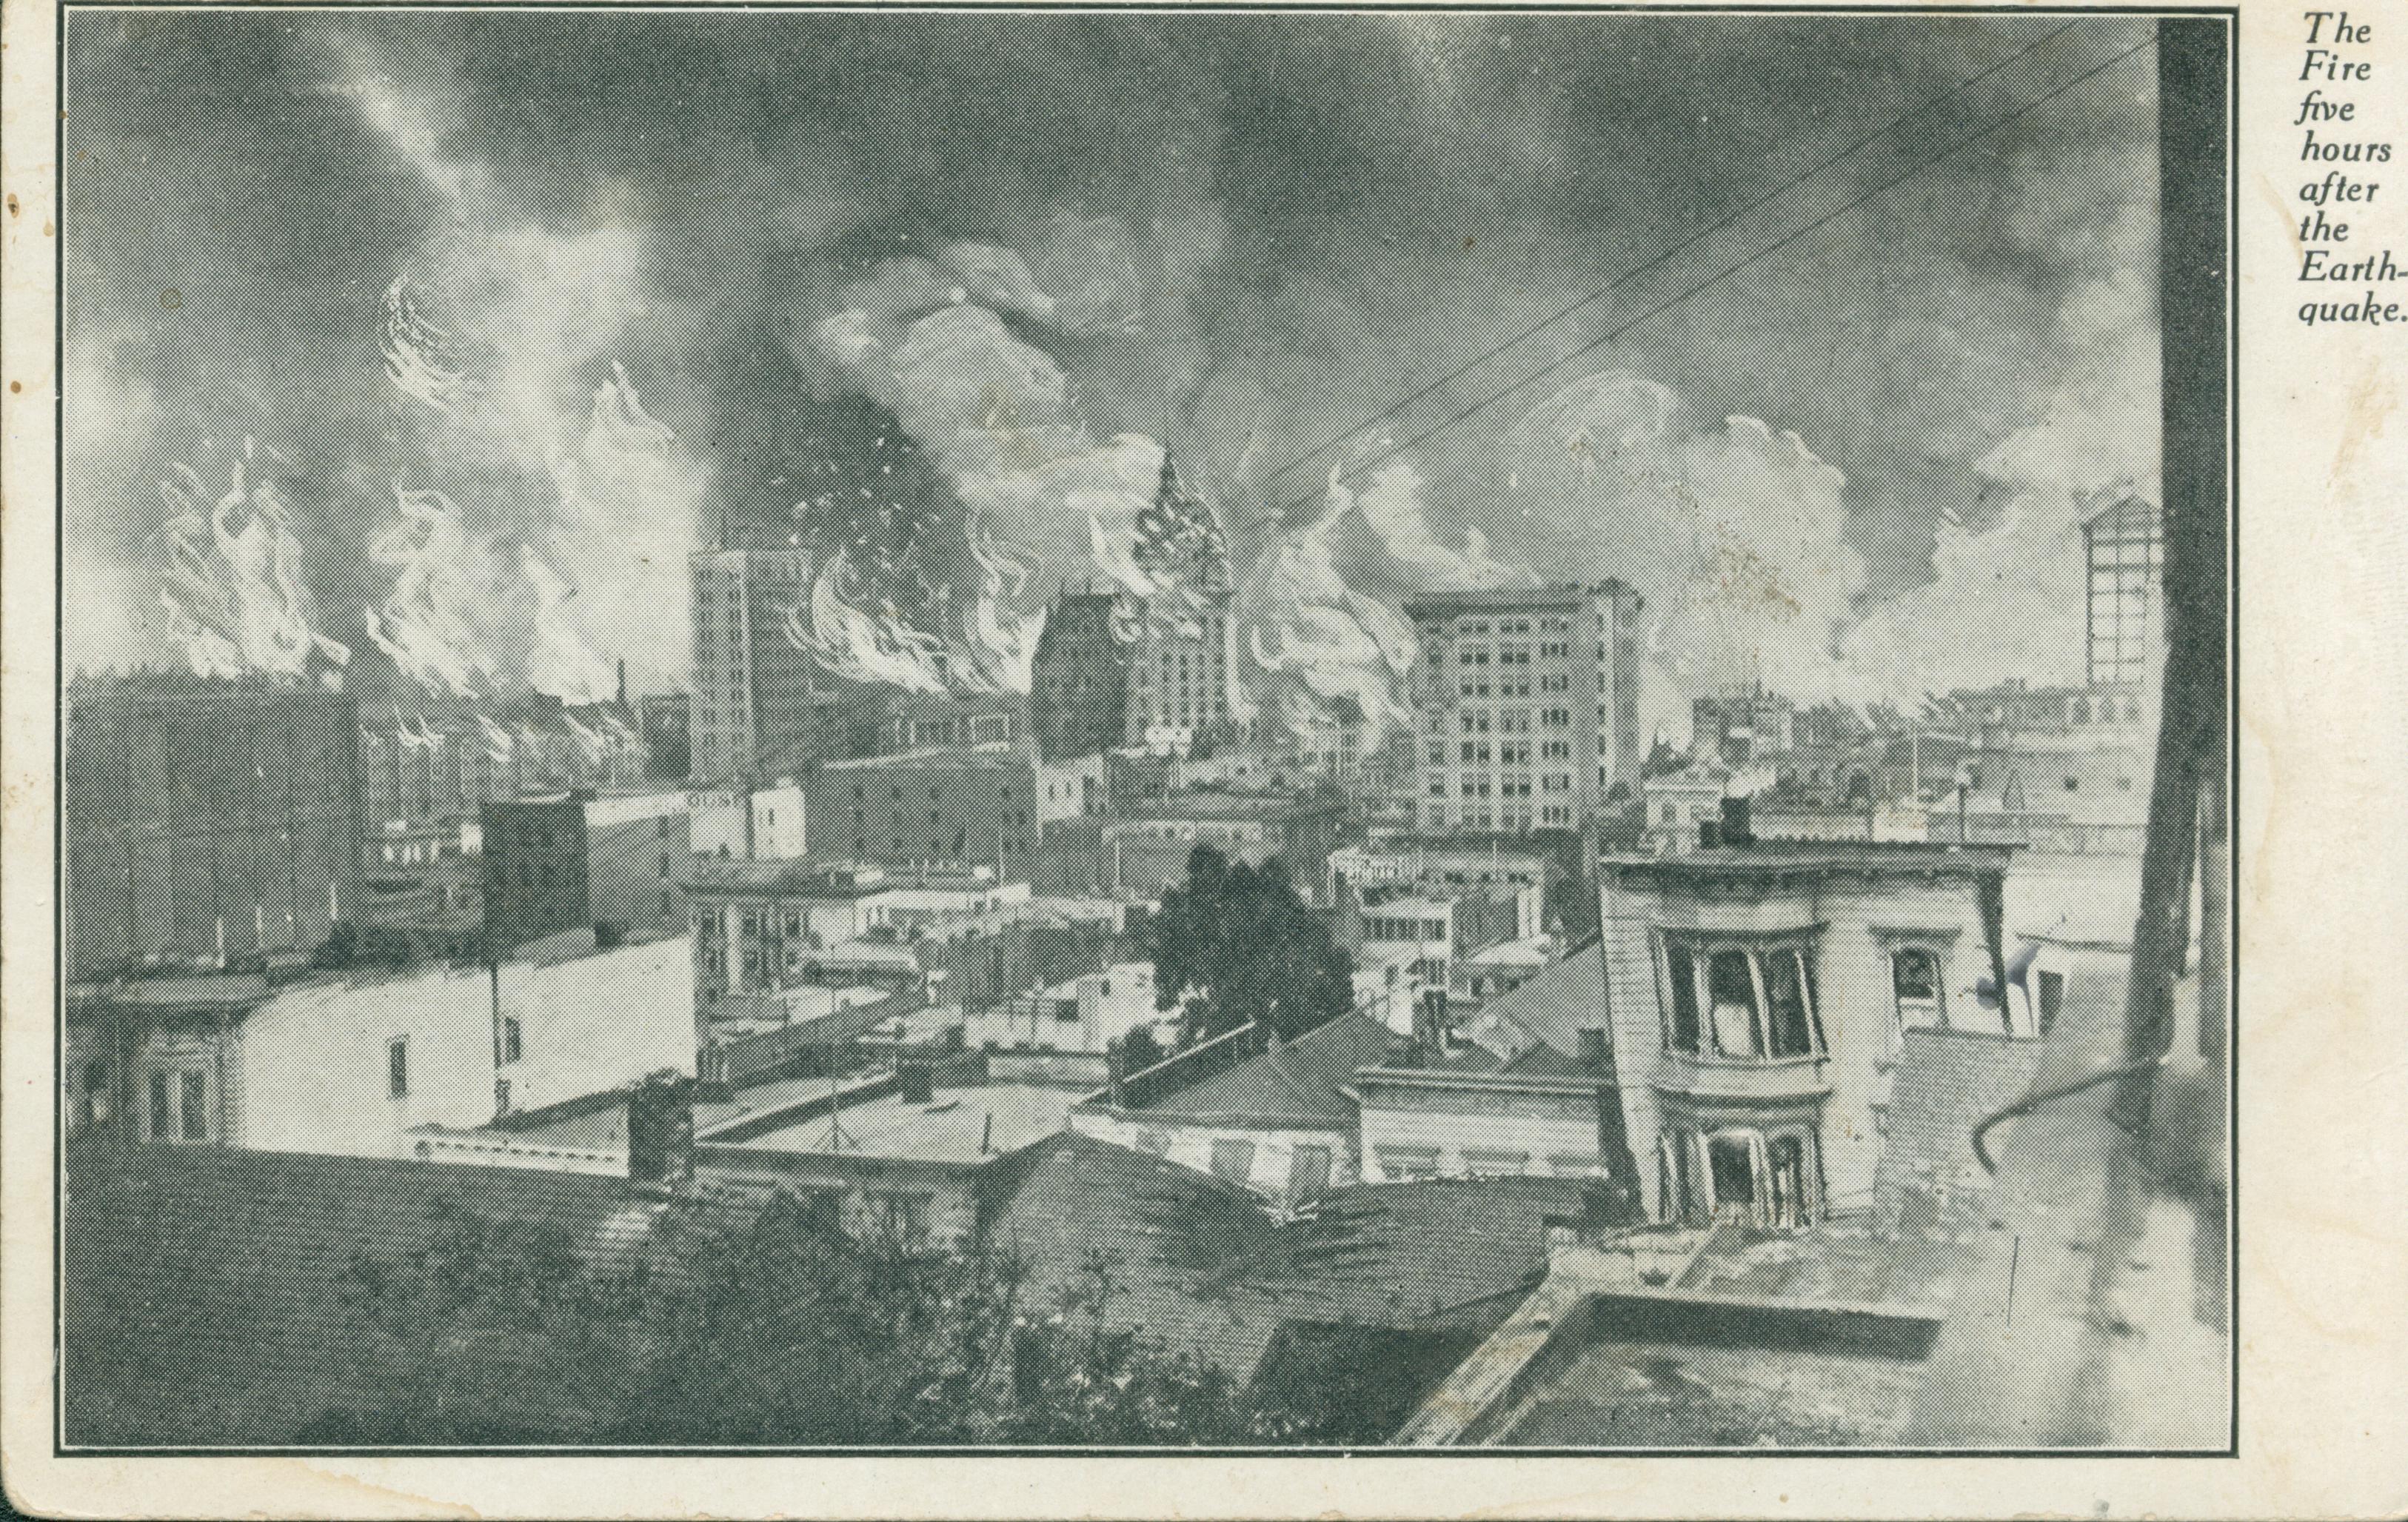 Shows a panoramic view of San Francisco on fire